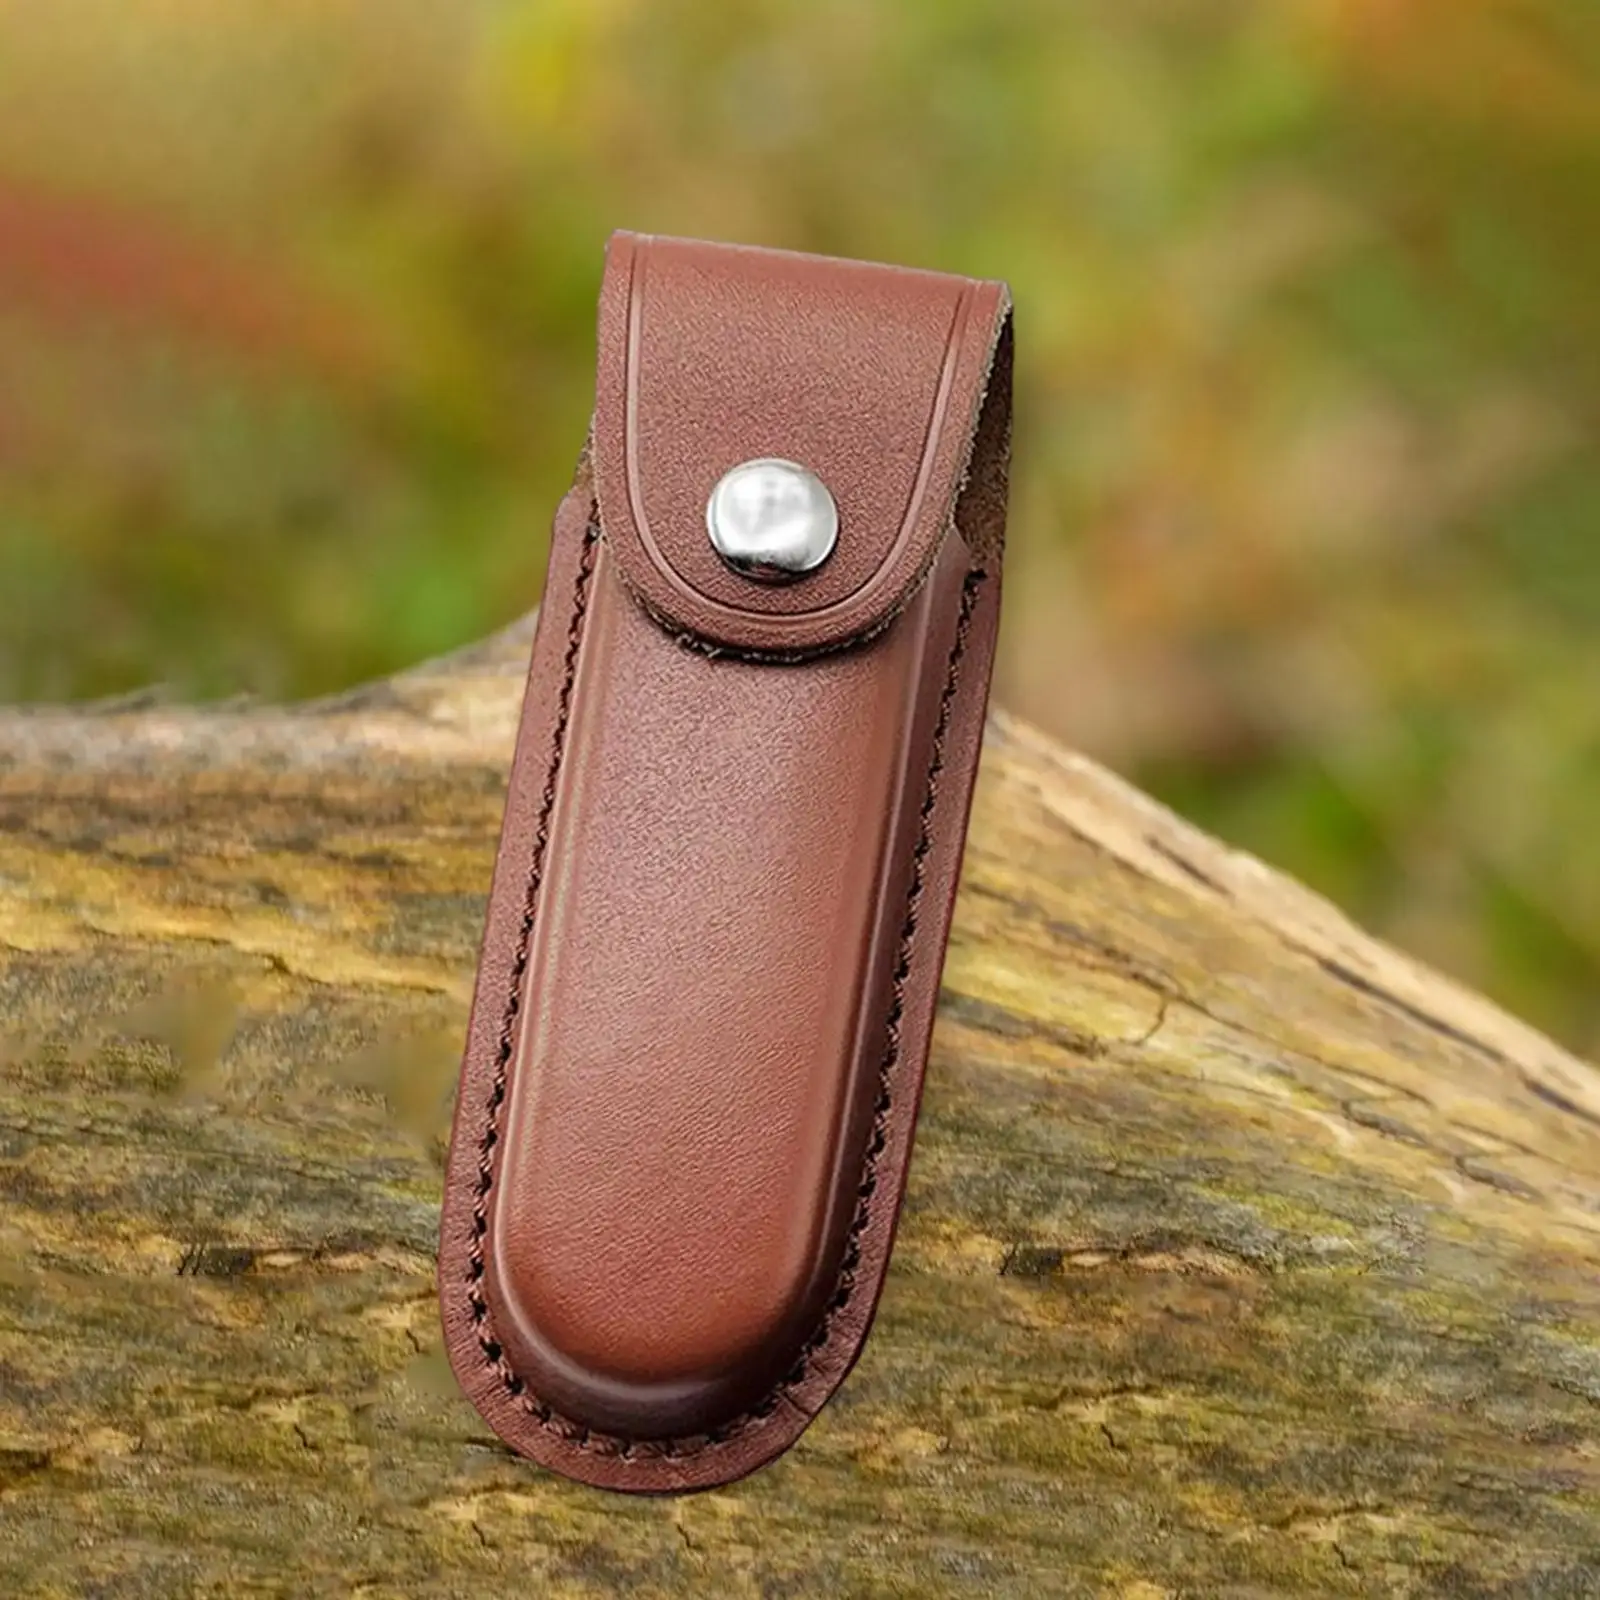 Leather Foldable Knives Hunting Holster Hiking Hunting Use for Pocket Knife Small Knife Belt Loop Design Easily Attach On Belt